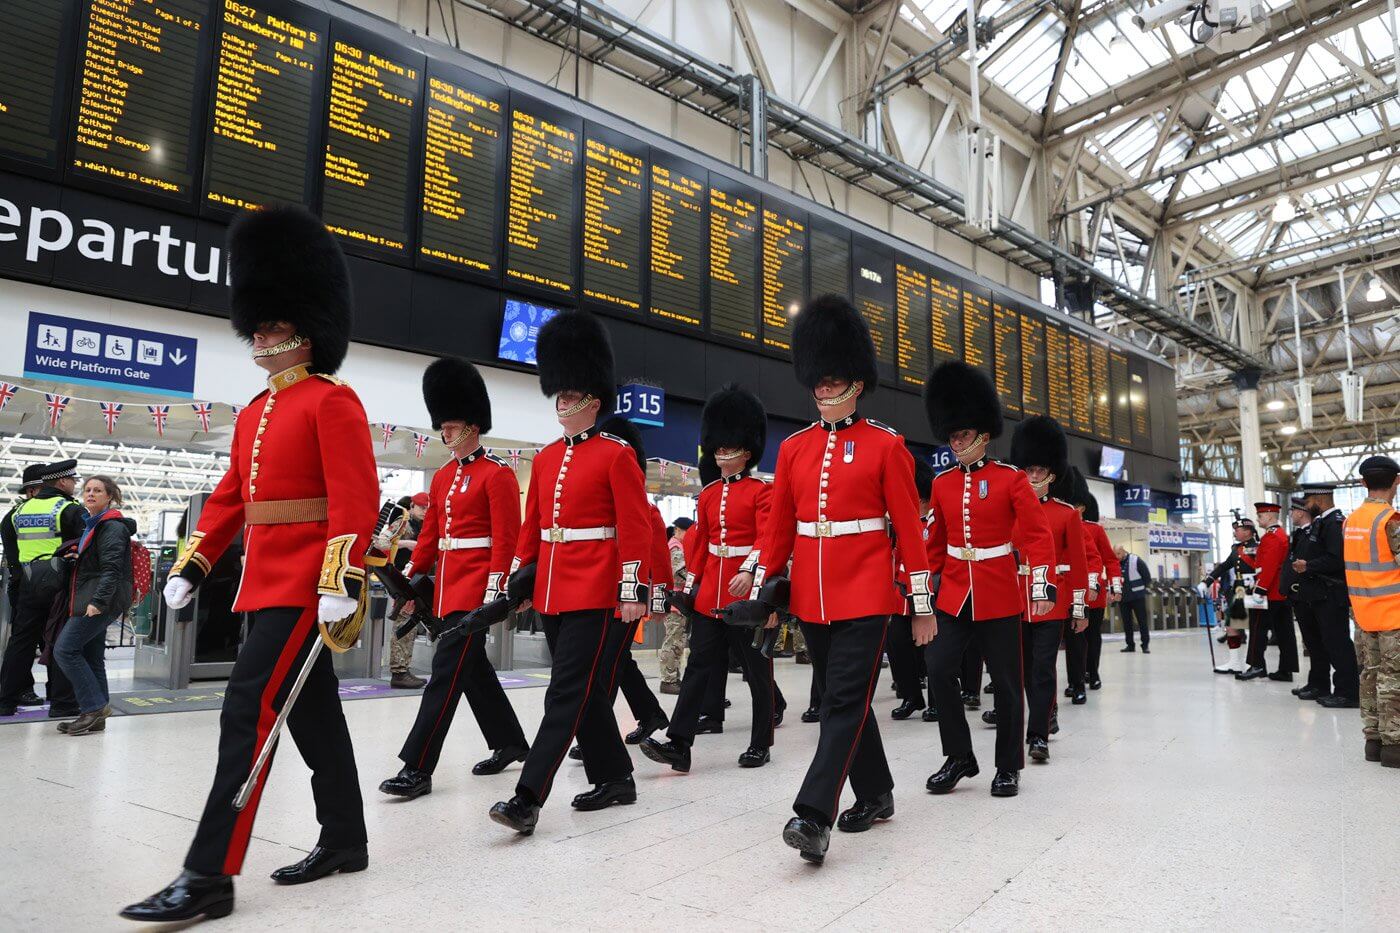 Members of the Armed Forces walk through London Waterloo station on Saturday morning